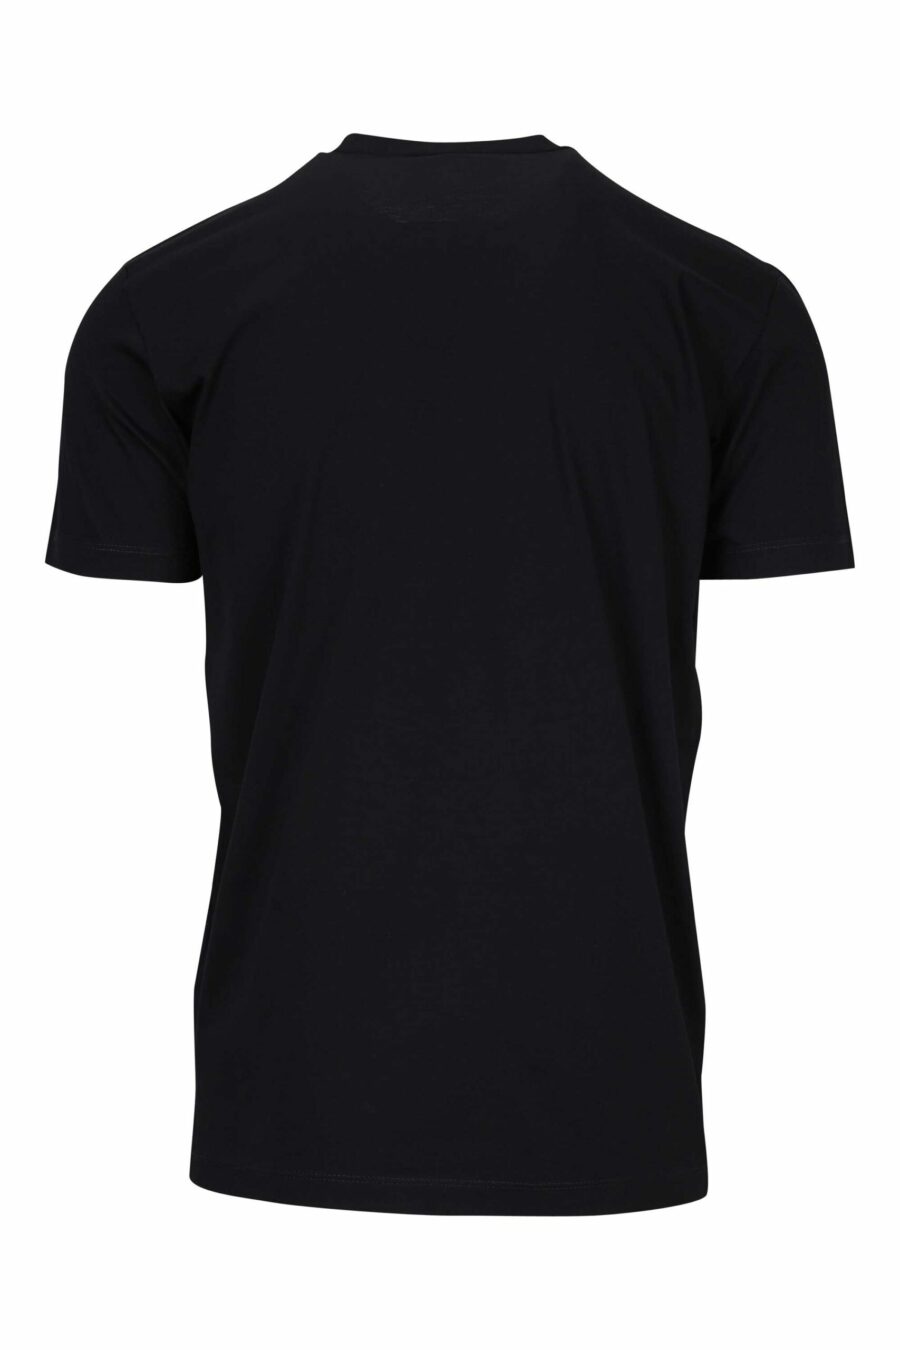 Black T-shirt with "icon" logo stamps - 8054148362744 1 scaled